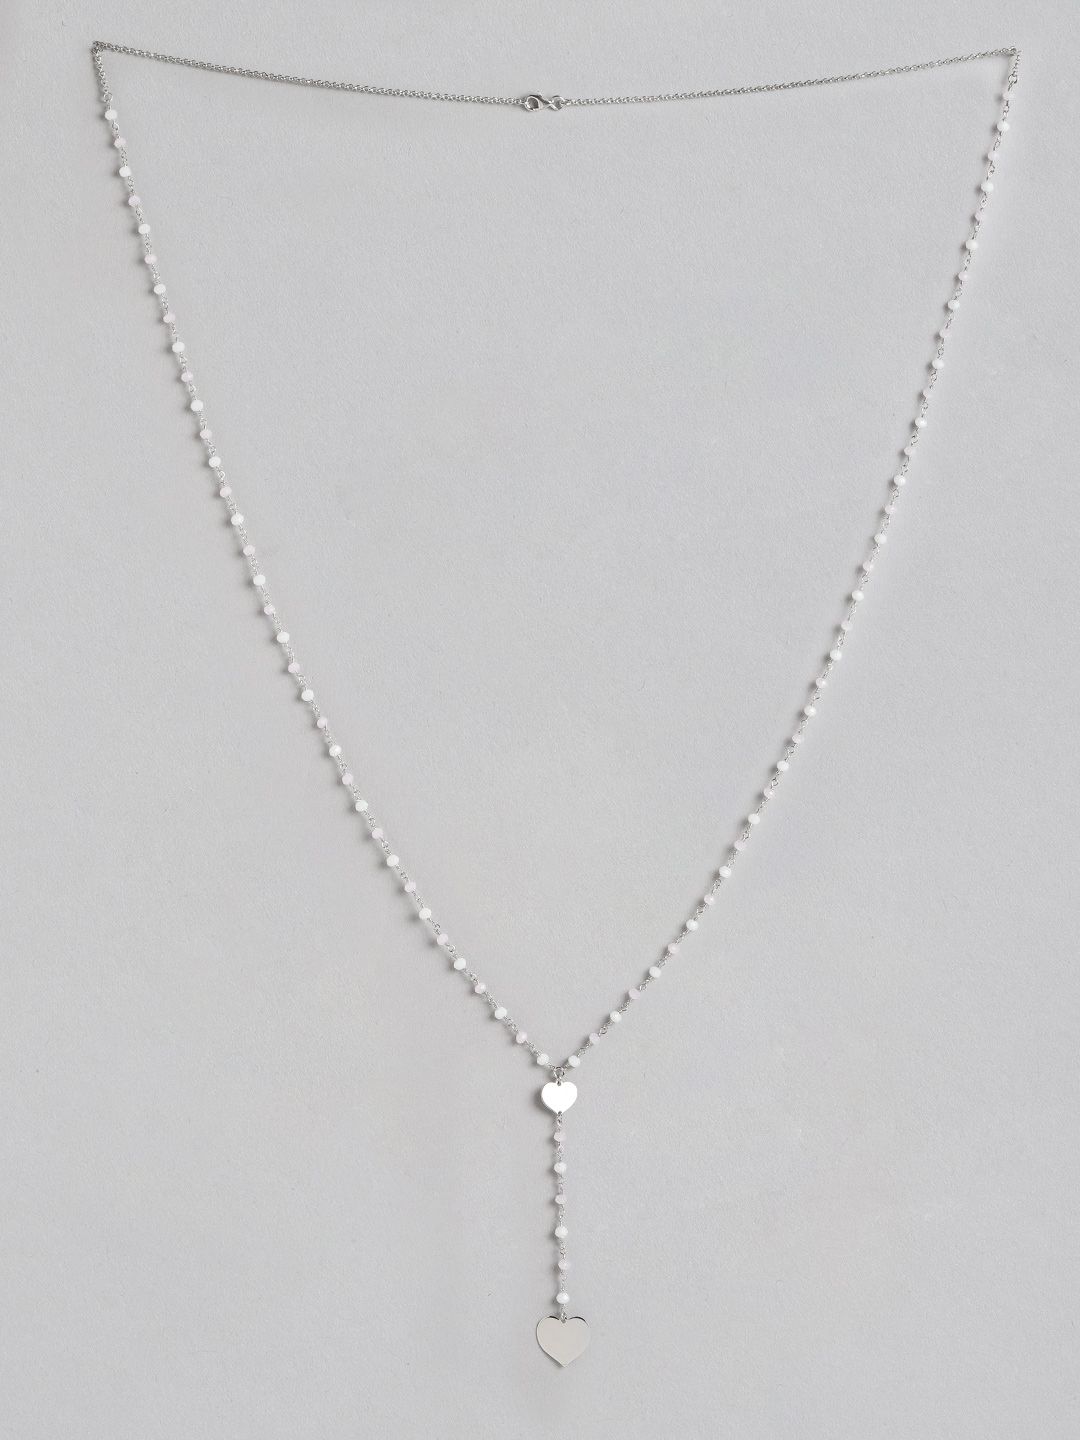 Carlton London Silver-Toned & White Brass Rhodium-Plated Necklace Price in India